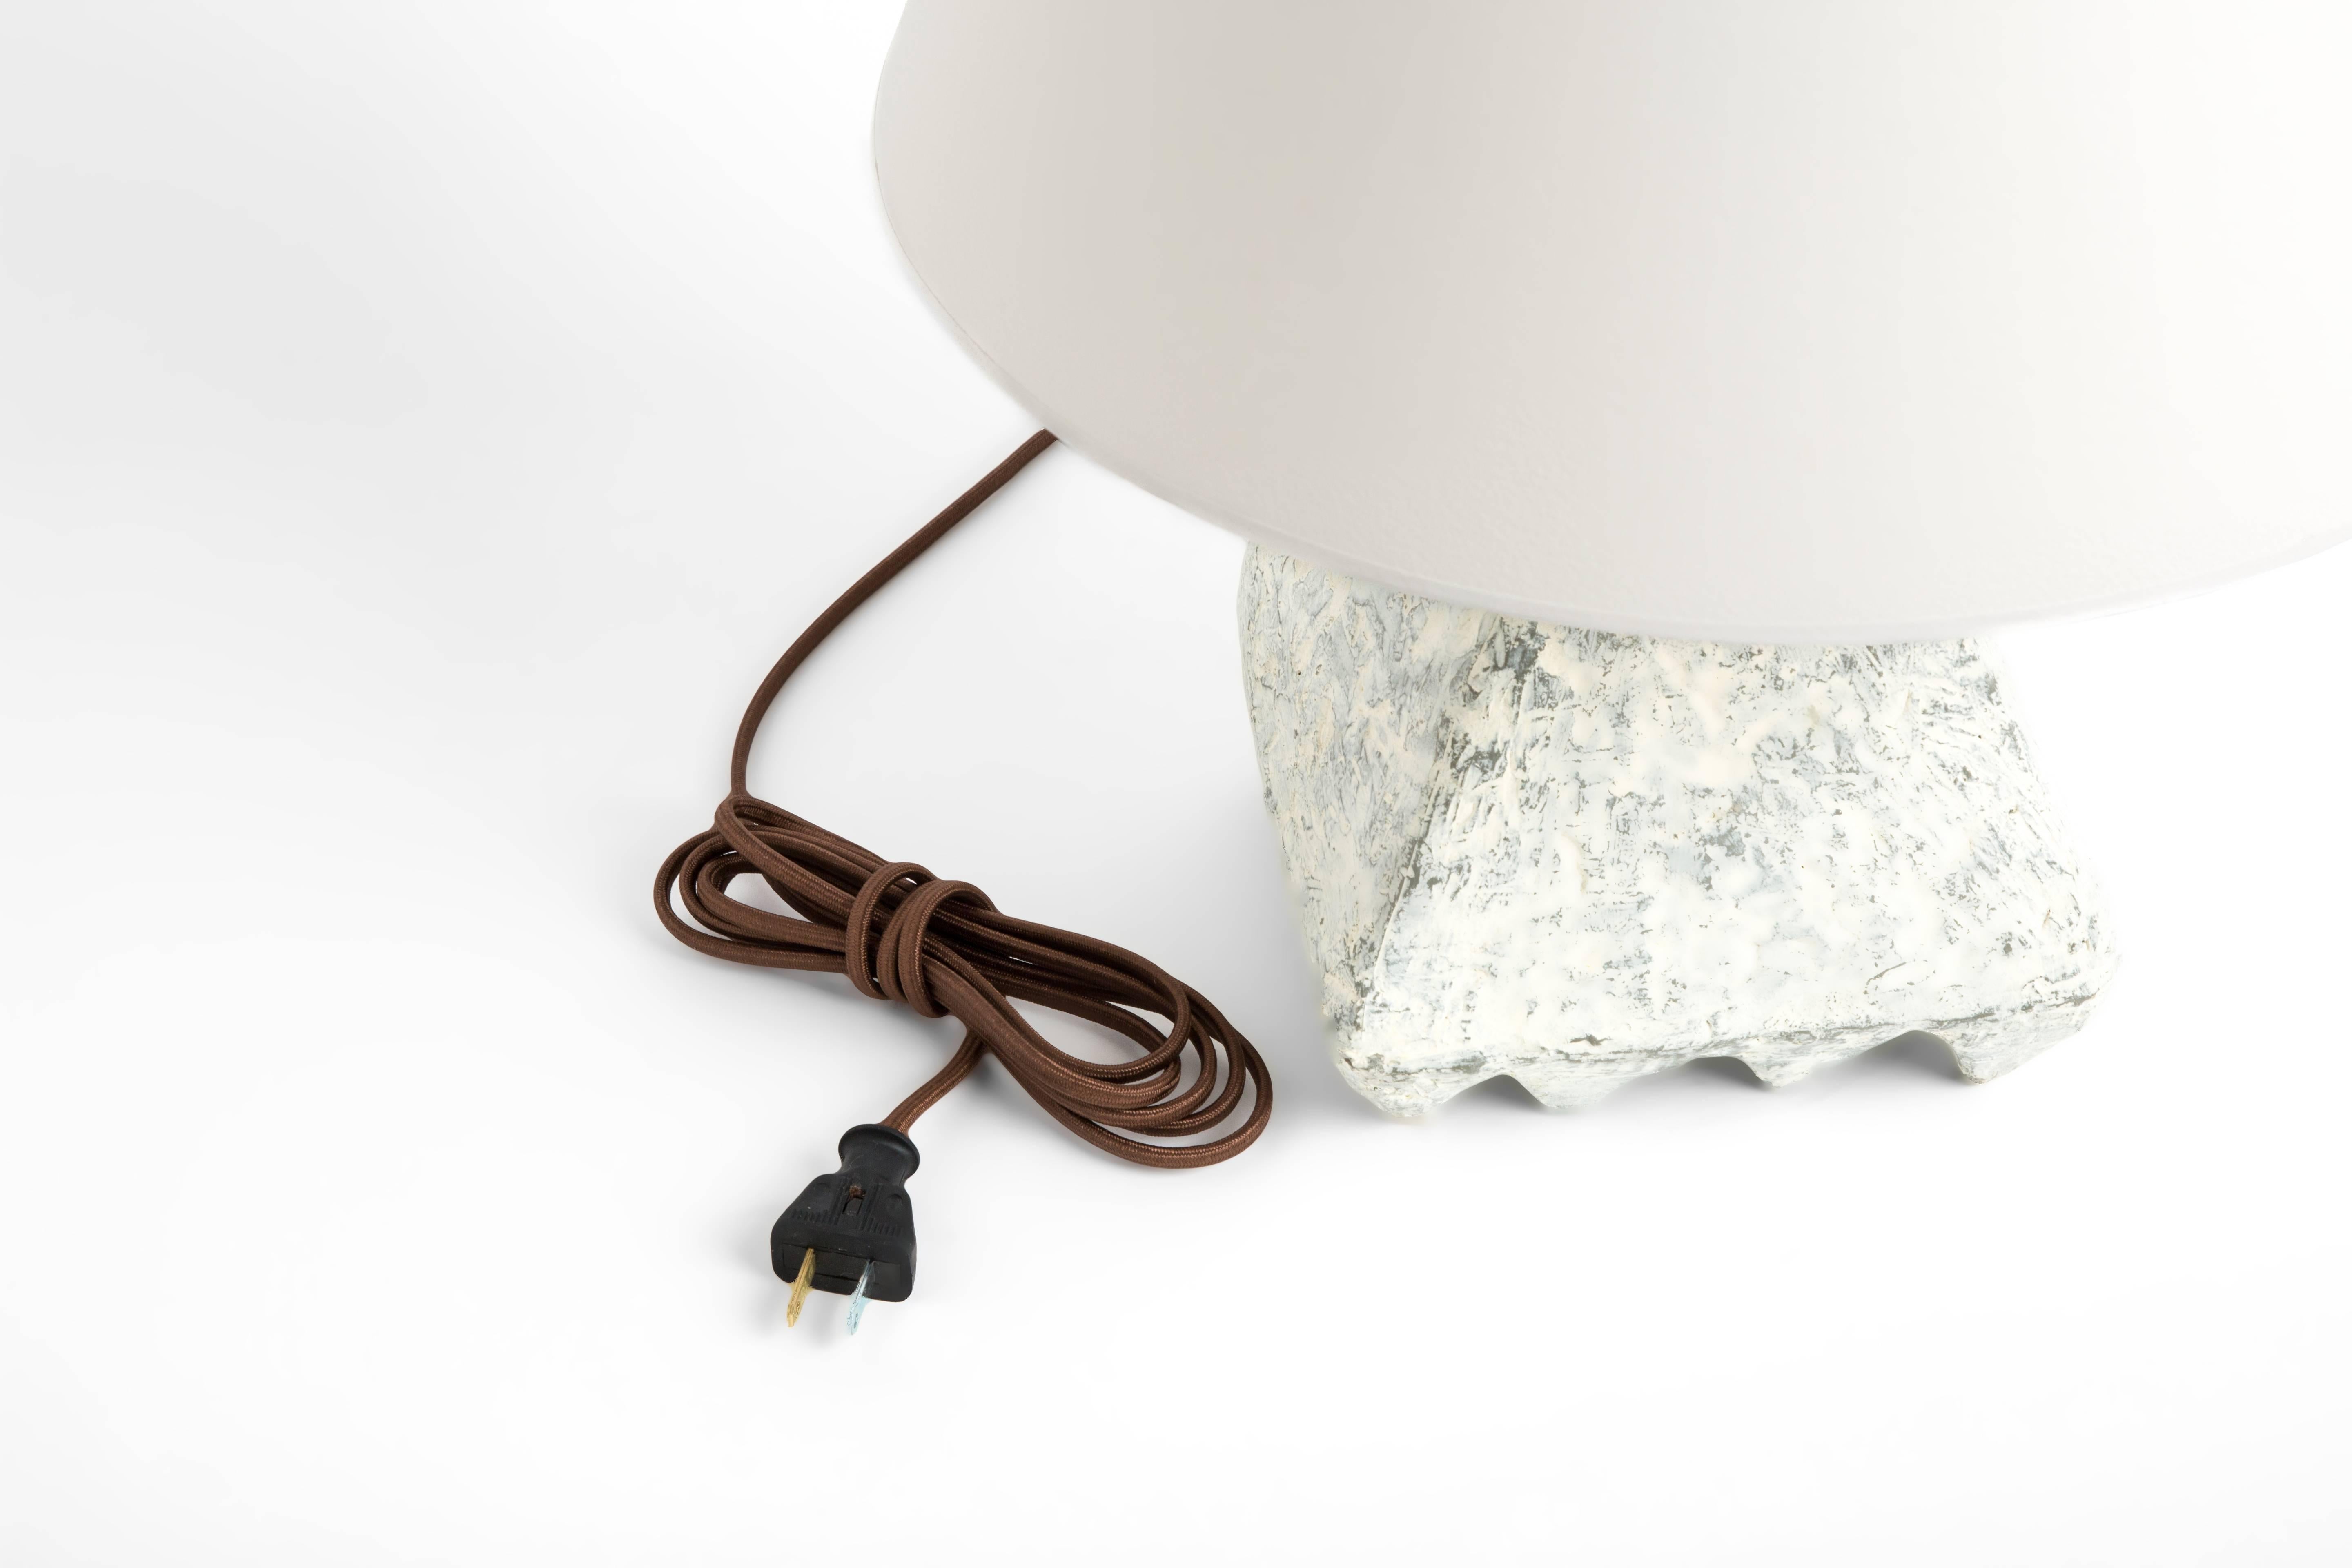 The Cubetto lamp is 1 of 5 resin lamps of Dolatowski's cast lamp series. This resin lamp is organic, modeled and textured in finish and geometric in form. 

Wired to US standards. Shade not included.

Influenced by his travels in Asia and the Middle